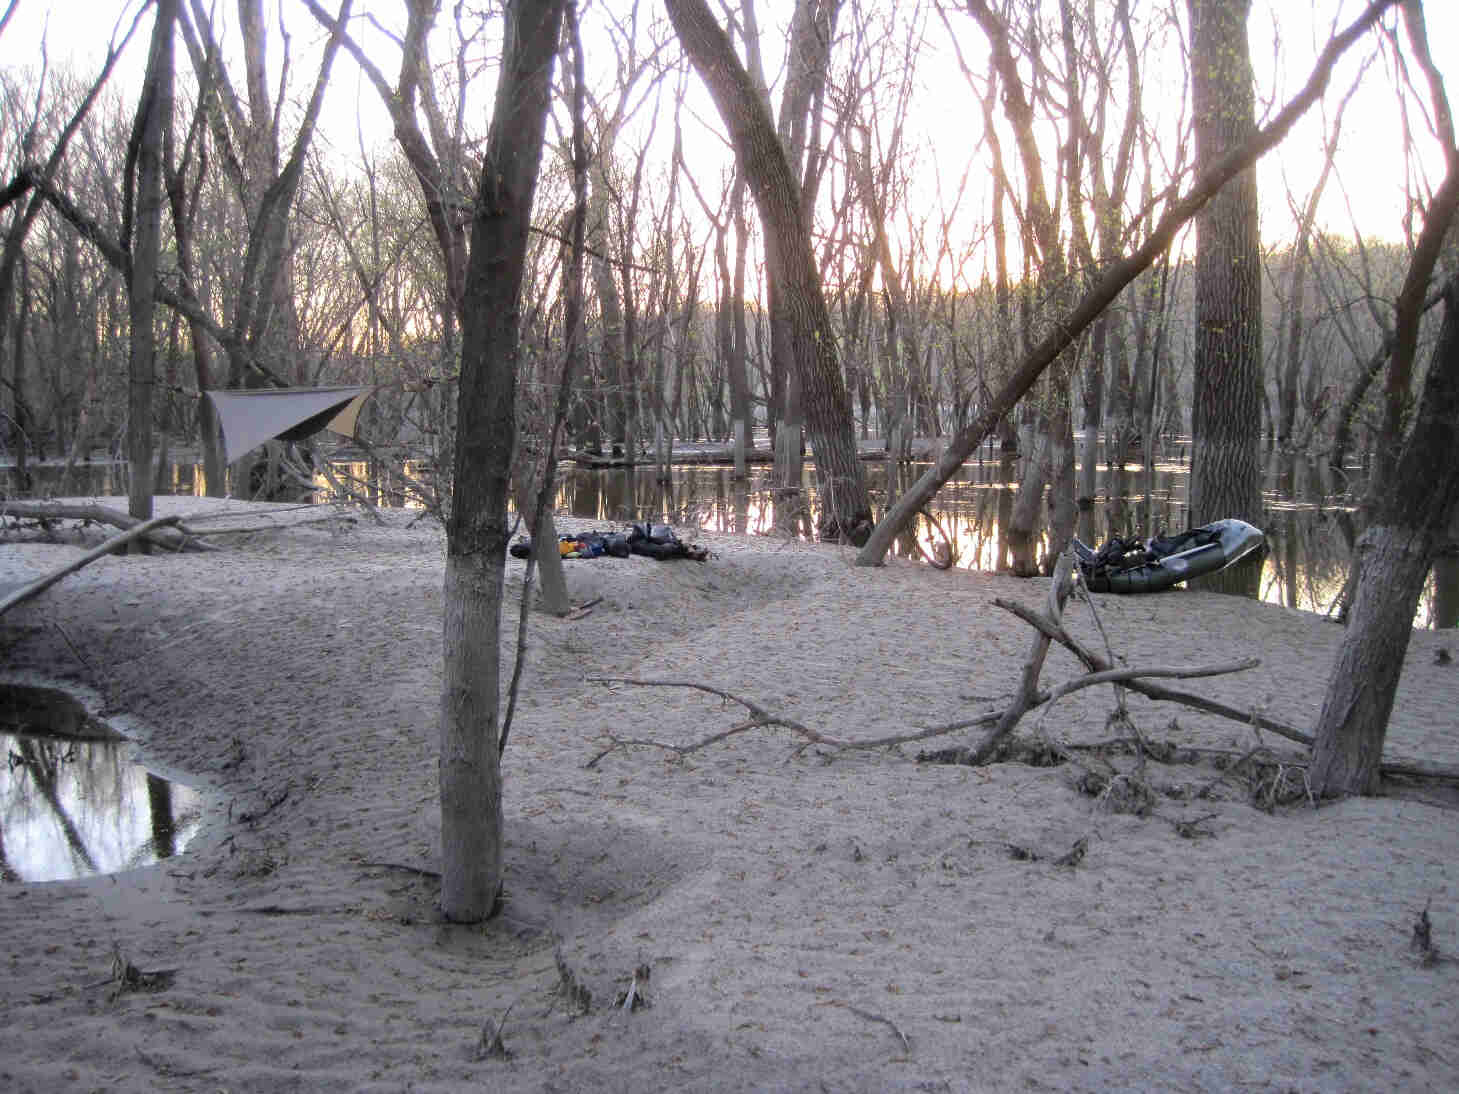 A makeshift camping area on a sandbar with trees, a tarp tent and an inflatable raft, in a flooded river bottoms area